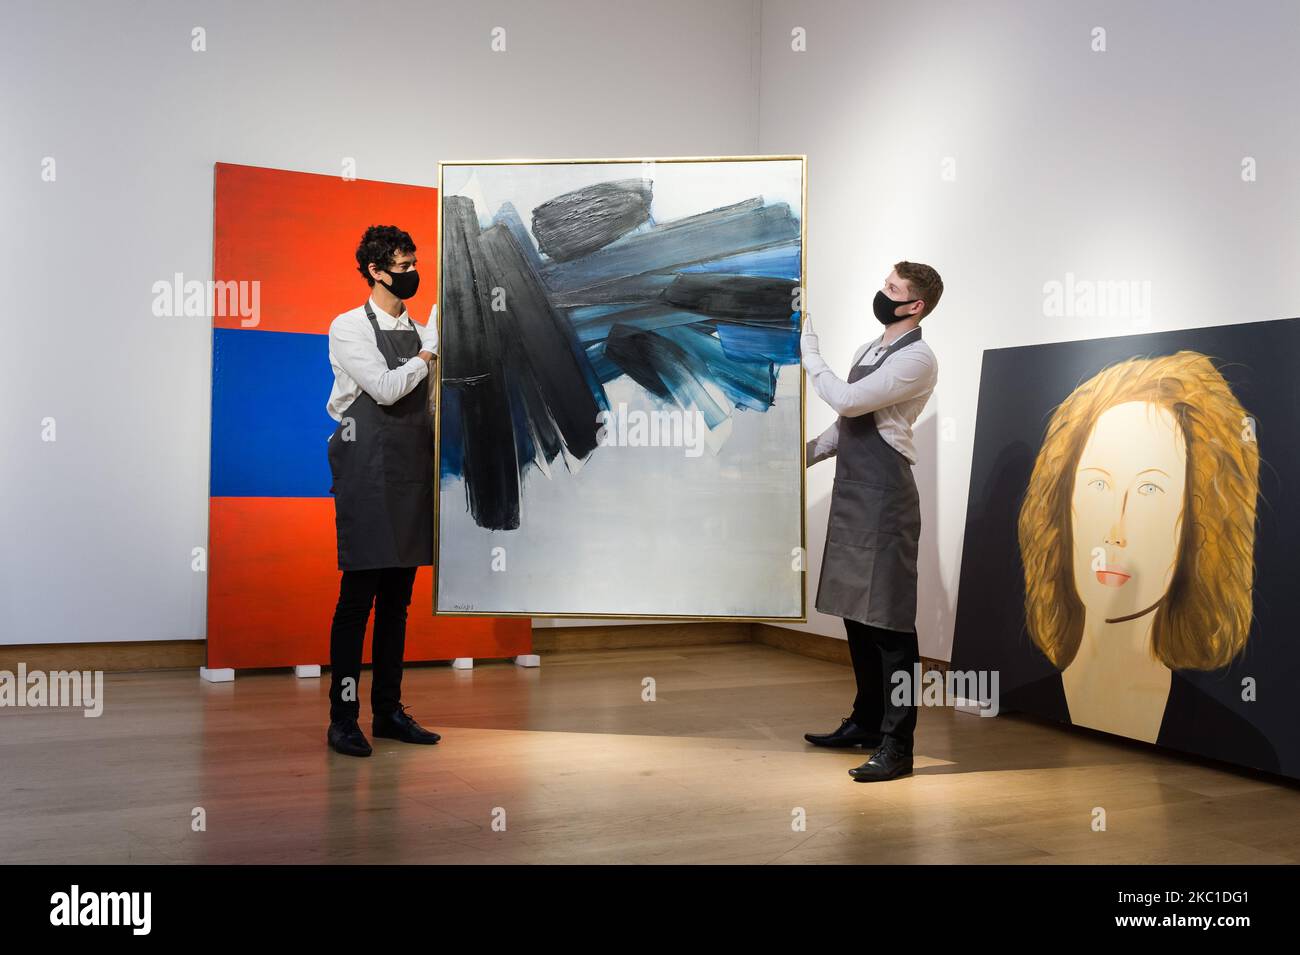 Staff members present Peinture 162 x 130 cm, 9 juillet 1961 by Pierre Soulages (est. €6,000,000-8,000,000) during a photo call for 20th Century: London to Paris sale series at Christie's on October 09, 2020 in London, England. The new sale series, jointly presented by Christie’s London and Christie’s Paris, celebrating the best in Impressionist, modern, post-war and contemporary art and design will take place on 22 and 23 October. (Photo by WIktor Szymanowicz/NurPhoto) Stock Photo